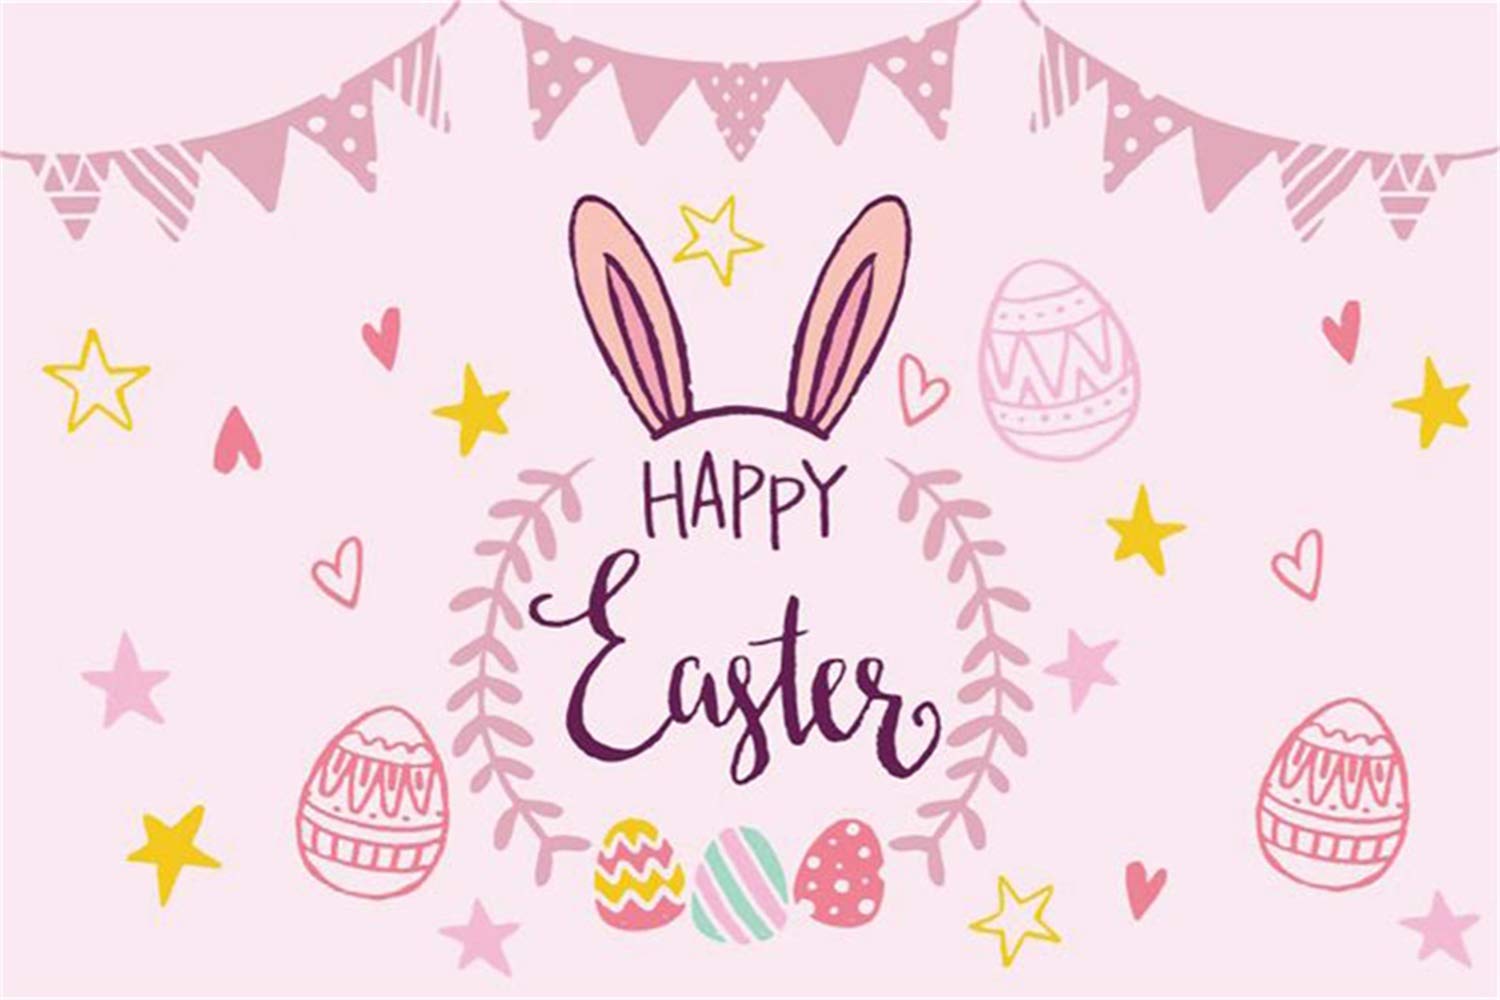 Amazon.com, Laeacco 5x3ft Vinyl Cartoon Happy Easter Day Background Bunting Cute Rabbit Ear Easter Eggs Red Hearts Golden Stars Pink Backdrops Children Girls Newborn Baby Portait Shoot Greeting Card Wallpaper